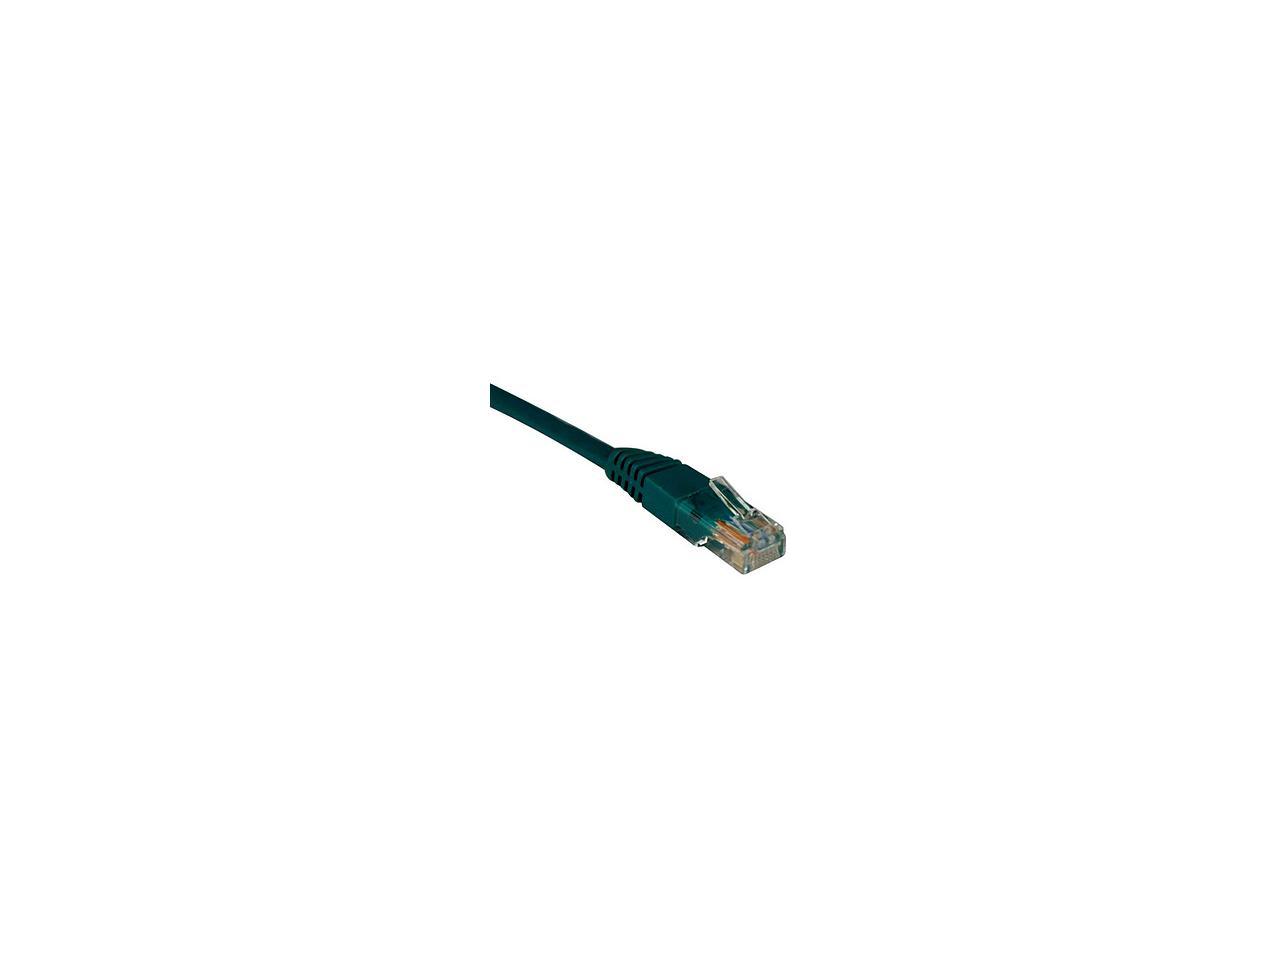 TRIPP LITE N002-005-GN 5 ft. Cat 5E Green Cat5e 350MHz Molded Patch Cable - image 1 of 2